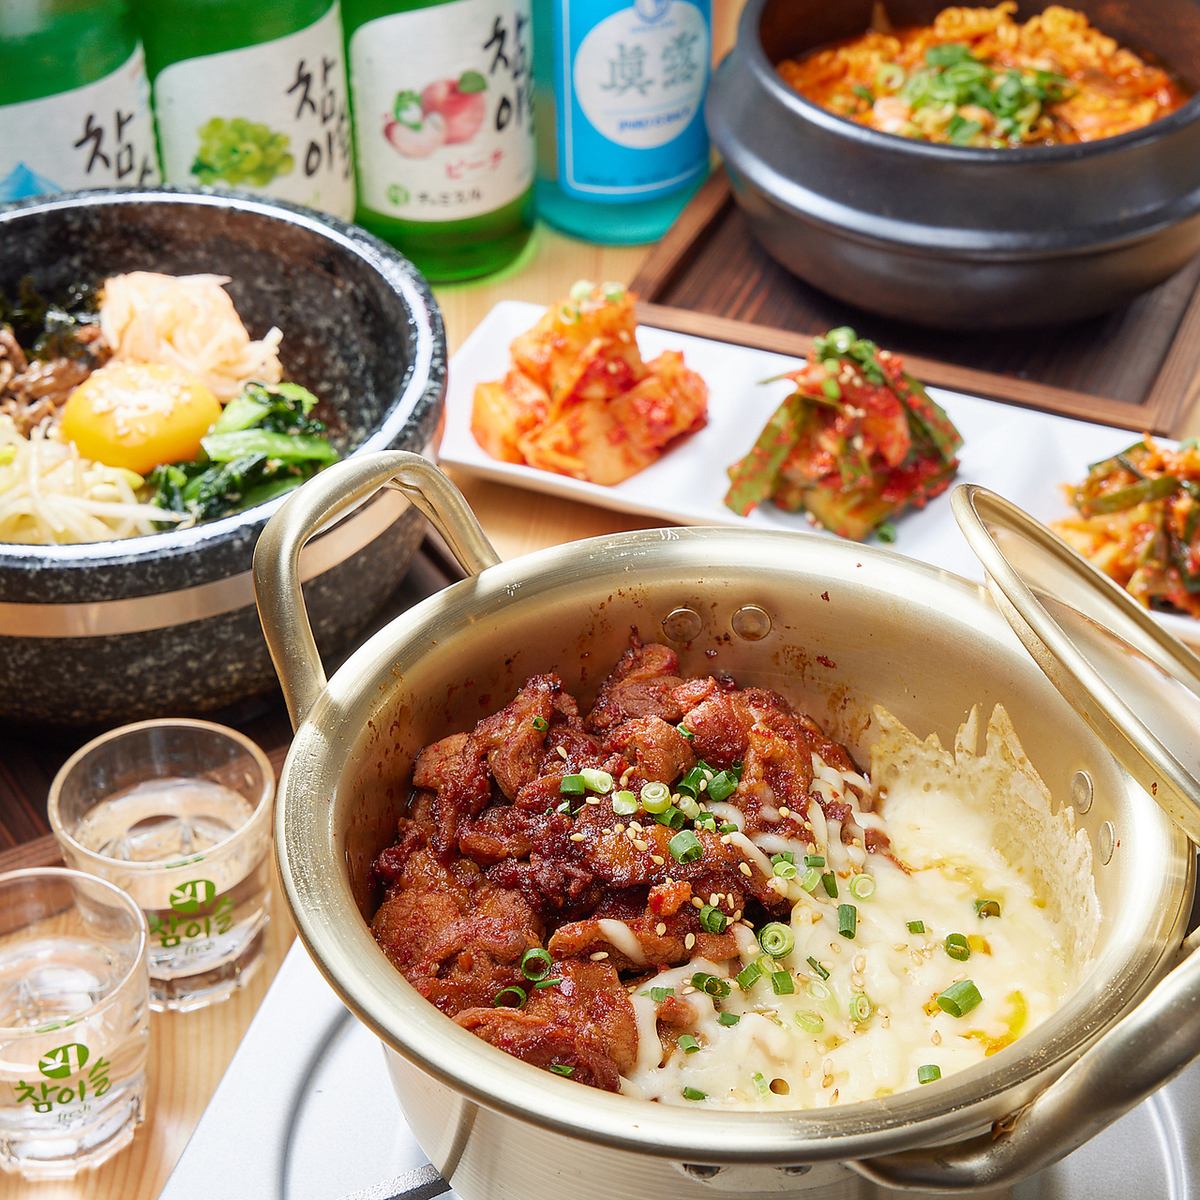 Korean cuisine prepared by a former sushi chef from South Korea tastes even better than the real thing!